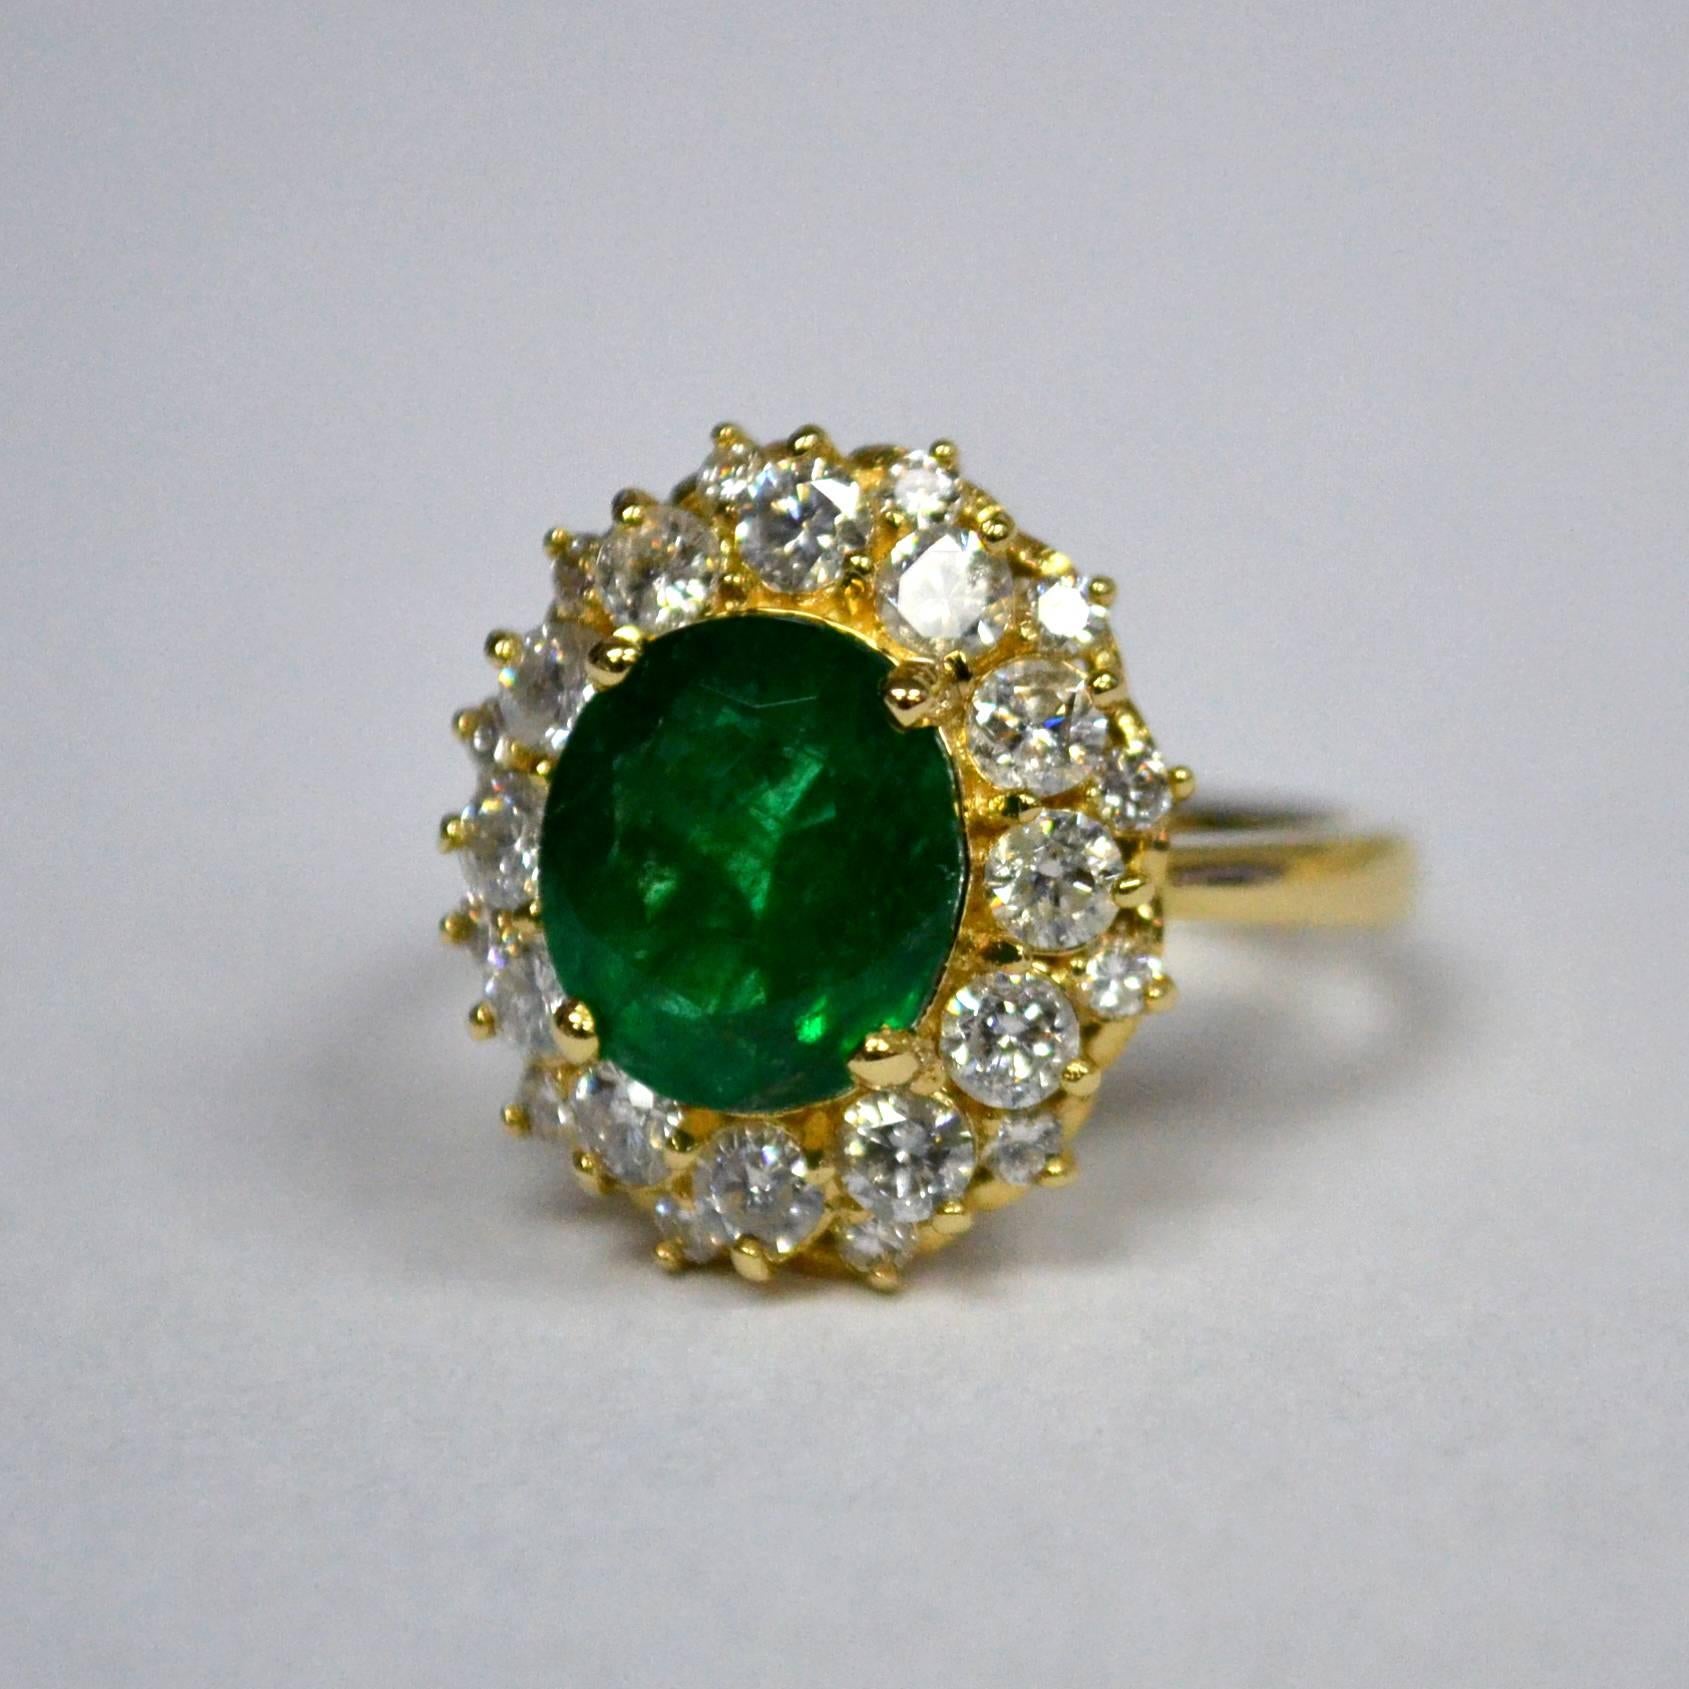 Princess Diana style engagement ring in 14 Karat yellow gold set with one oval cut Zambian Emerald (3.17 carat) and 24 round brilliant-cut Diamonds (1.44 carats).

Ring US Size 7.5 
*Complimentary resizing service*